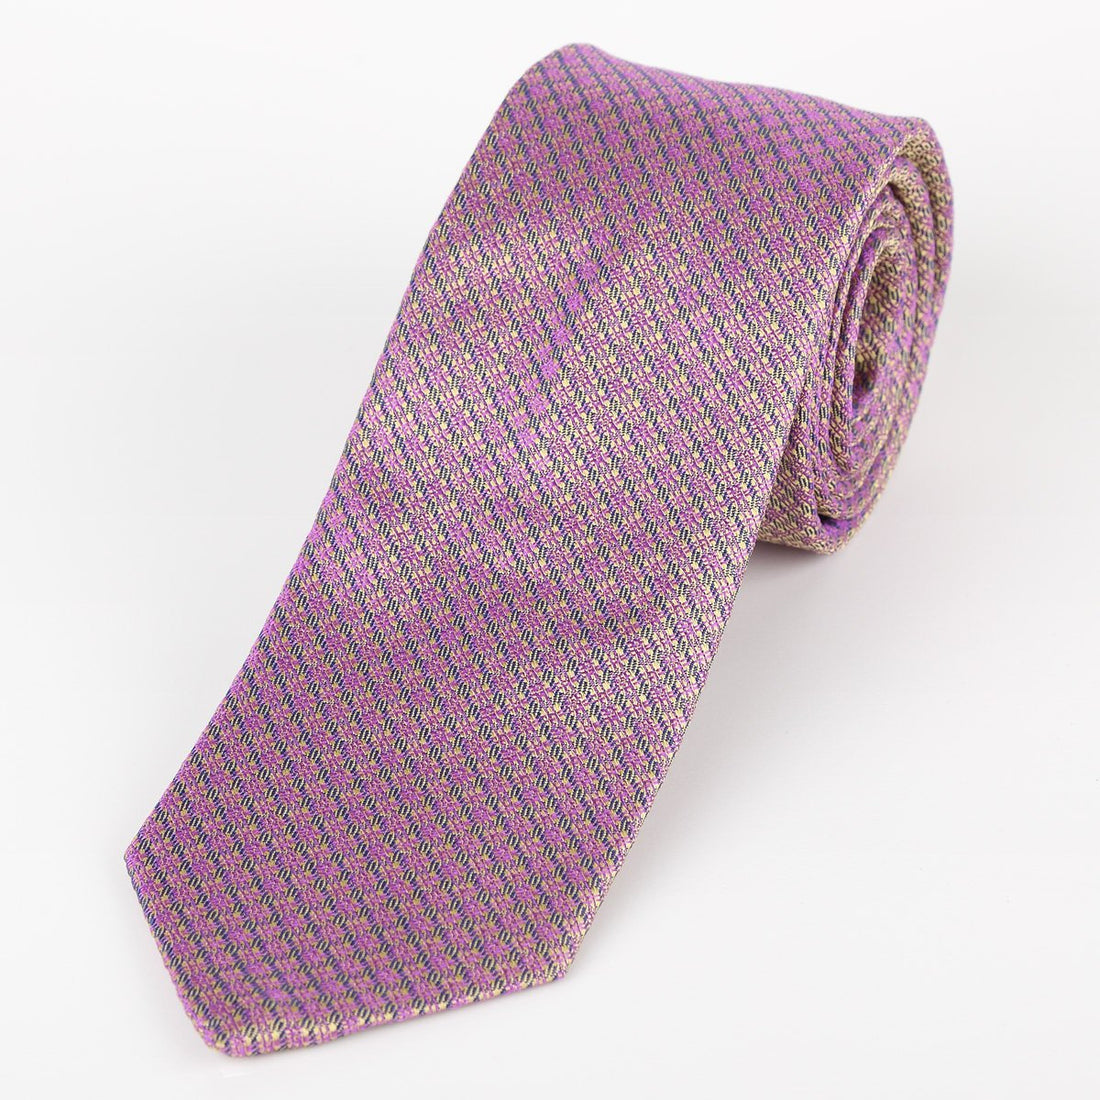 JACQUES MONCLEEF Mens Italian Silk Neck Tie in Beige and Purple Textured Weave